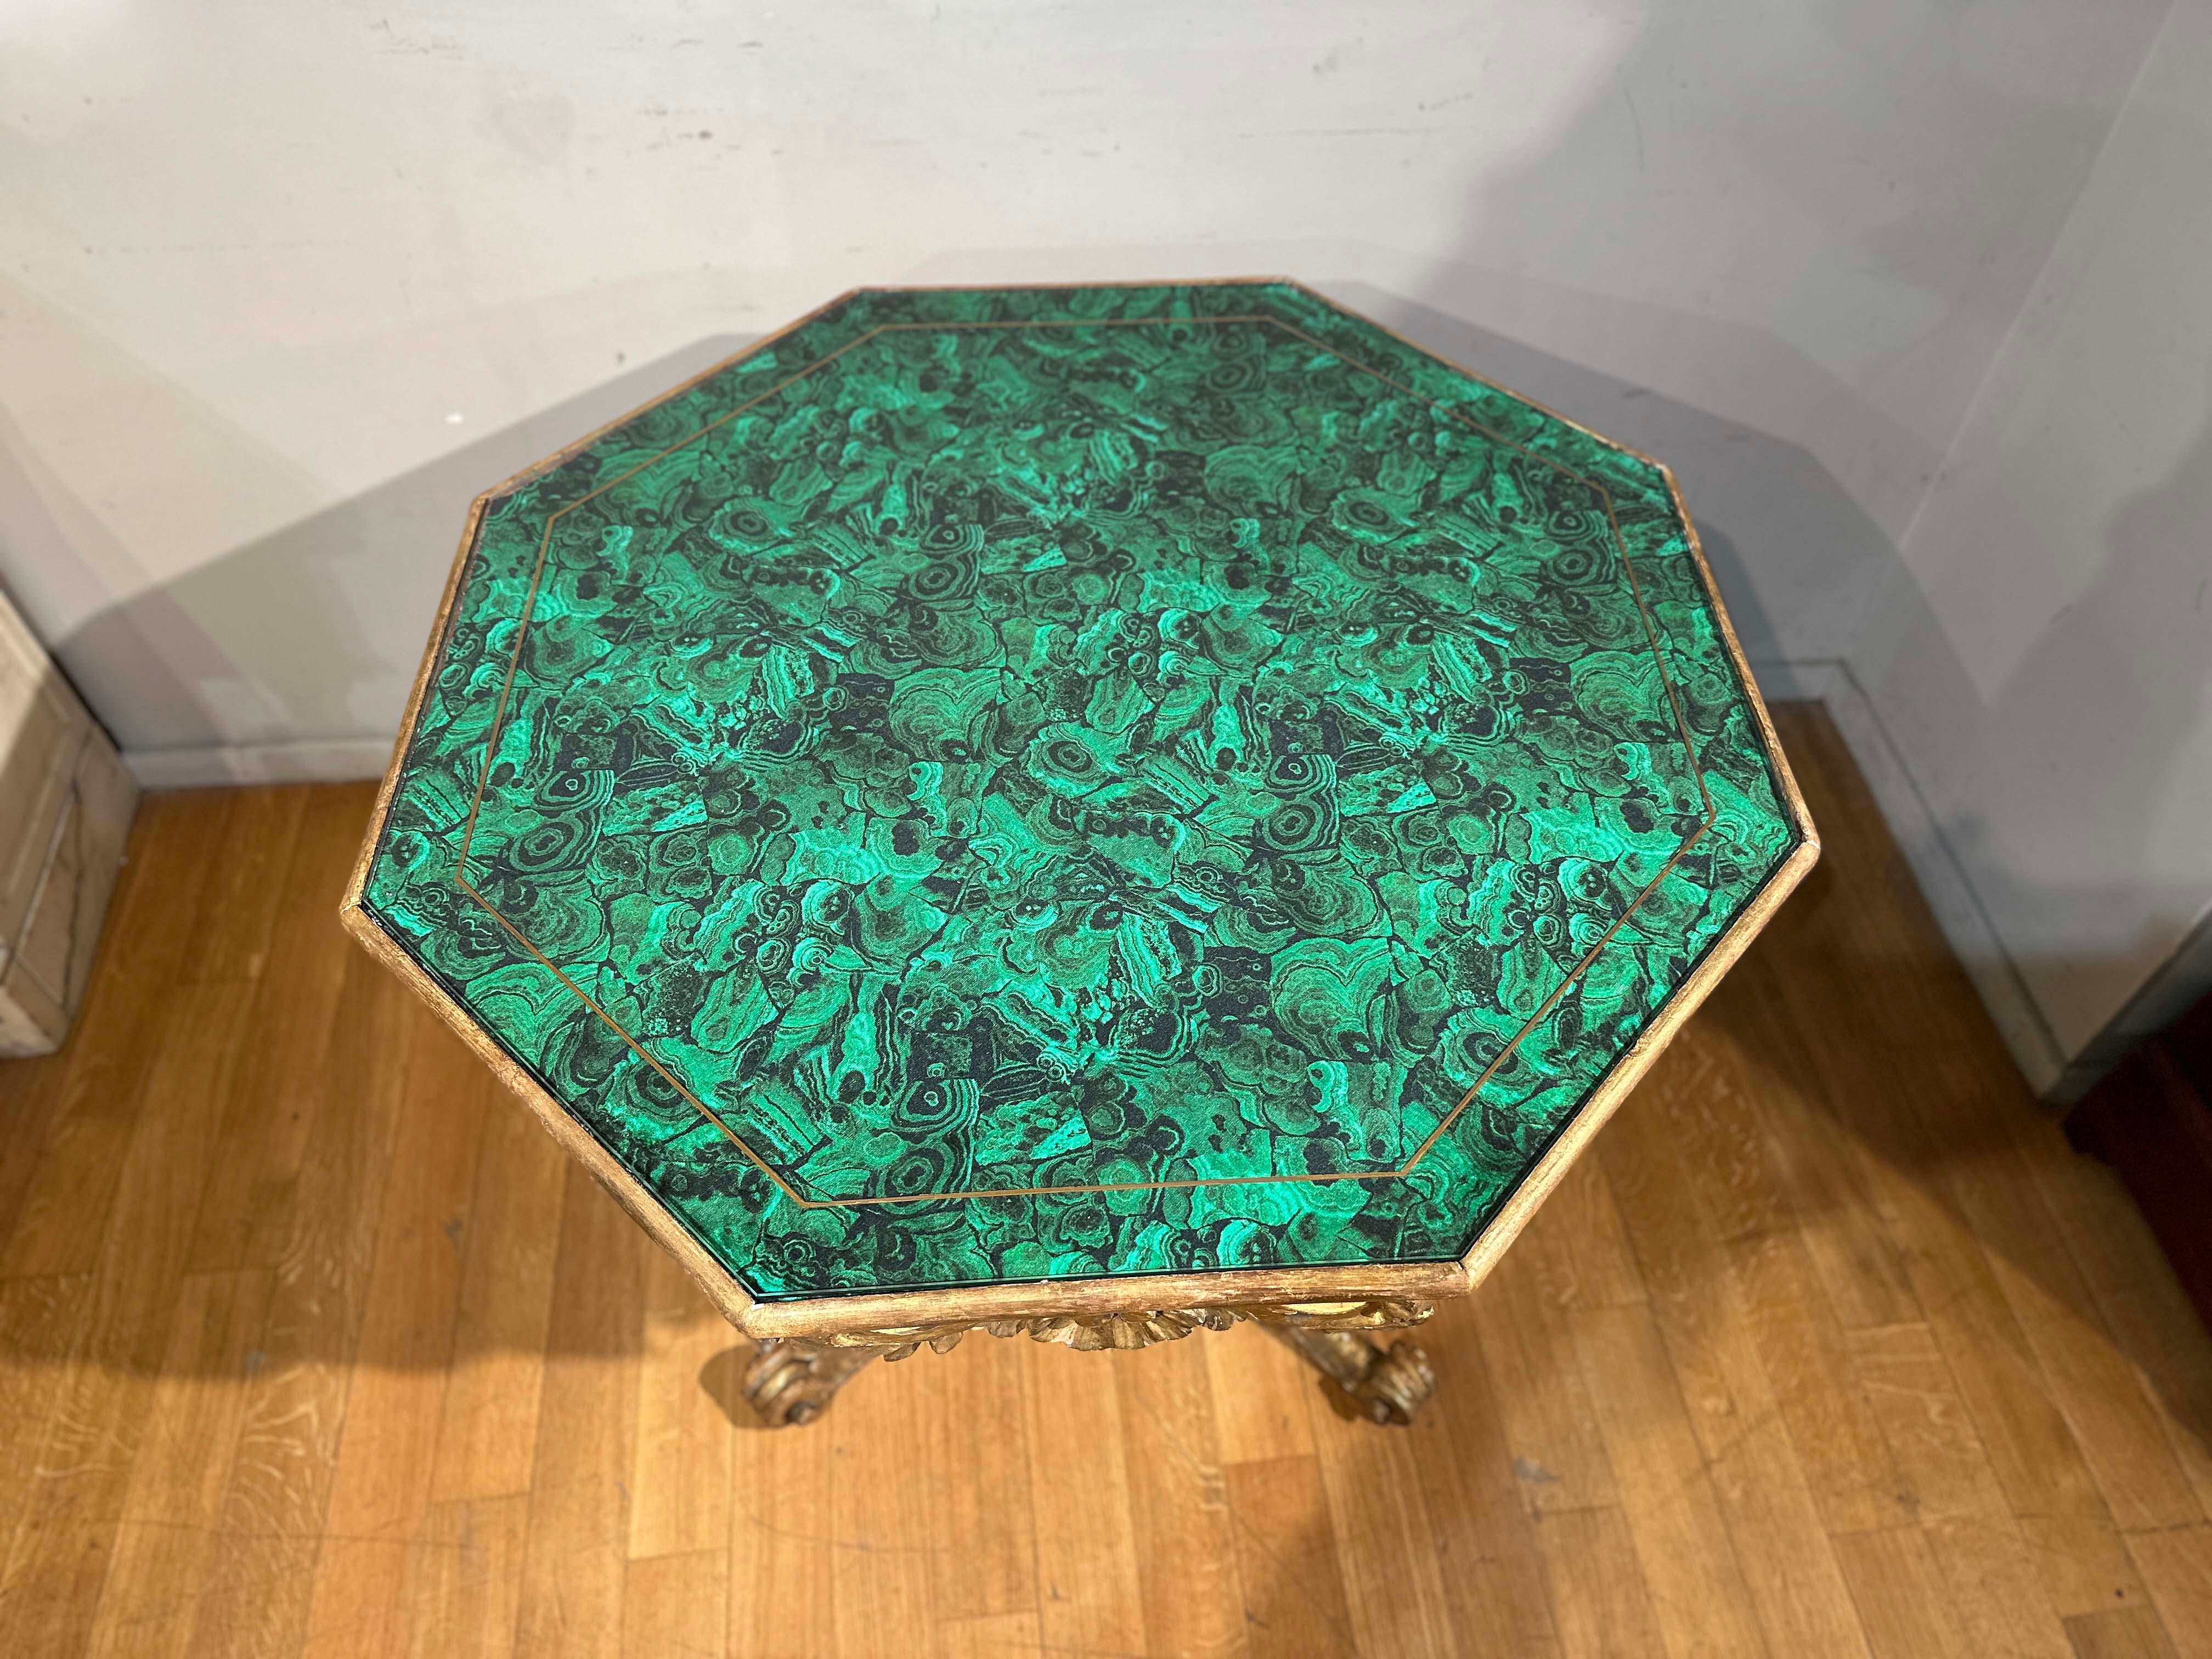 EARLY 19th CENTURY GILDED WOOD TABLE WITH SIMILAR MALACHITE FABRIC im Angebot 2